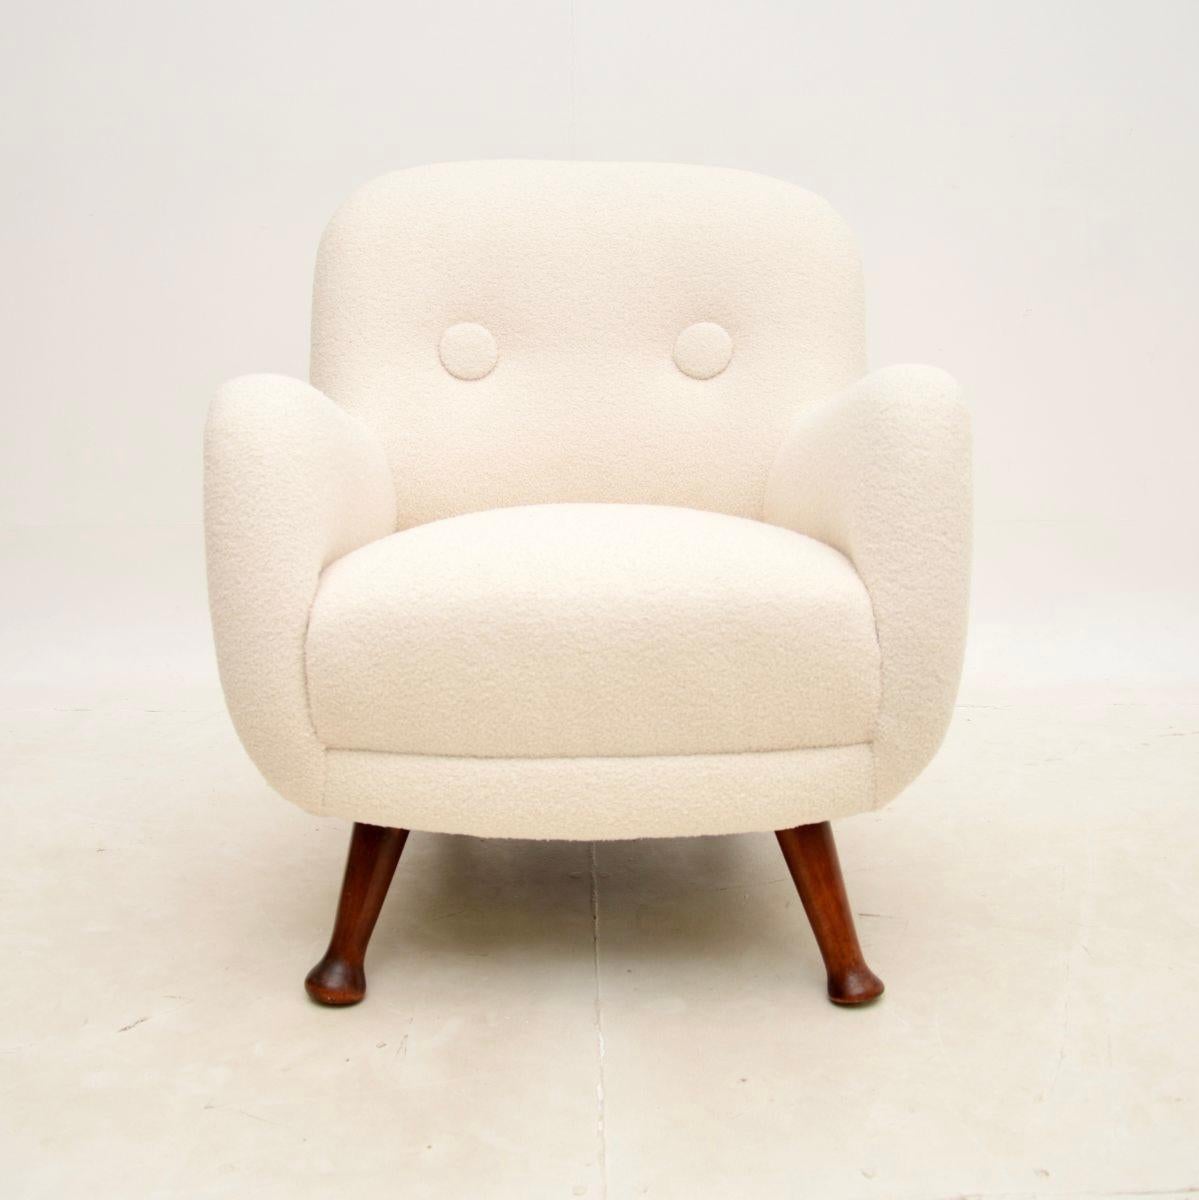 A gorgeous and very comfortable Danish vintage armchair by Berga Mobler. This was recently imported from Denmark, it dates from the 1940’s.

The quality is outstanding, it has a beautiful design and looks amazing from all angles. The curvaceous